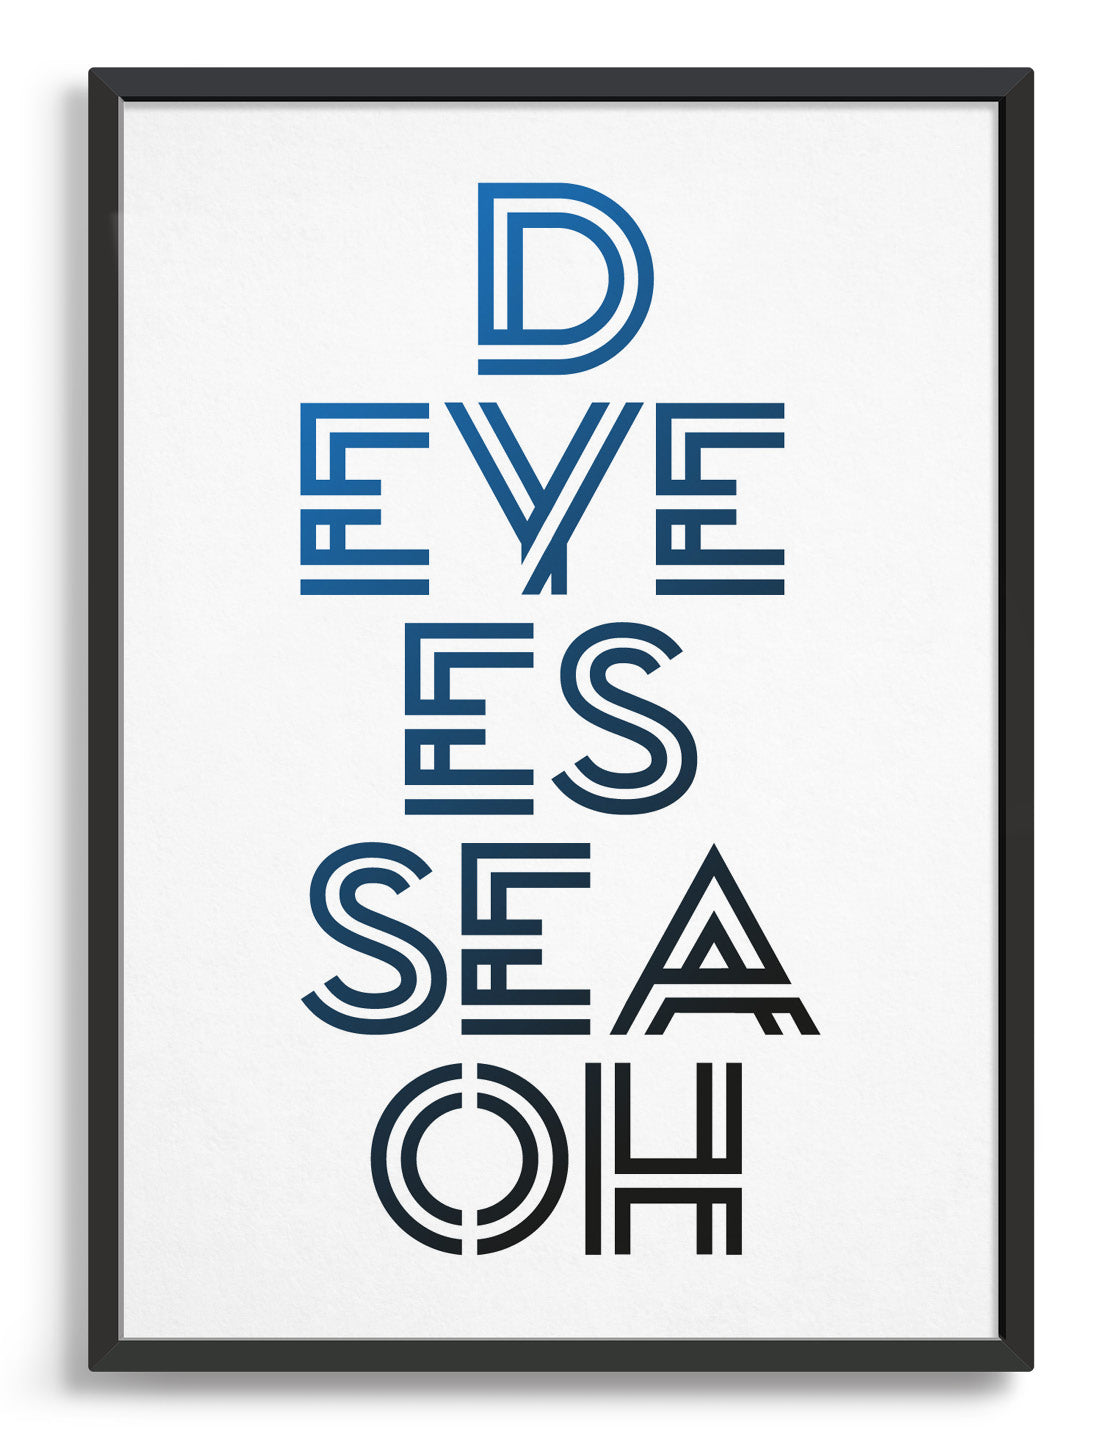 typography art print with disco spelled out d eye es sea oh on a white background